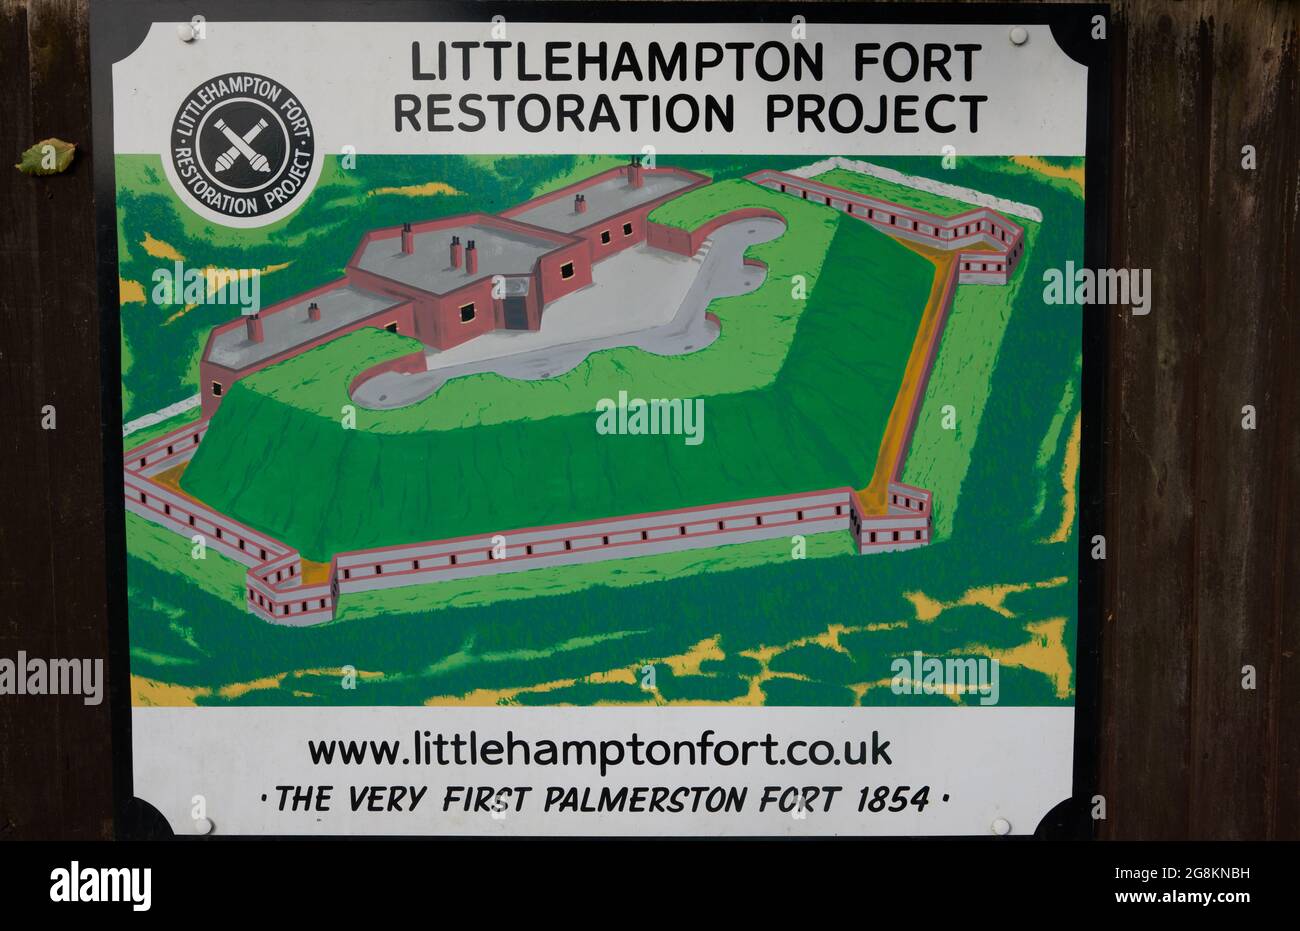 Board with information on the Littlehampton fort restoration project. Stock Photo